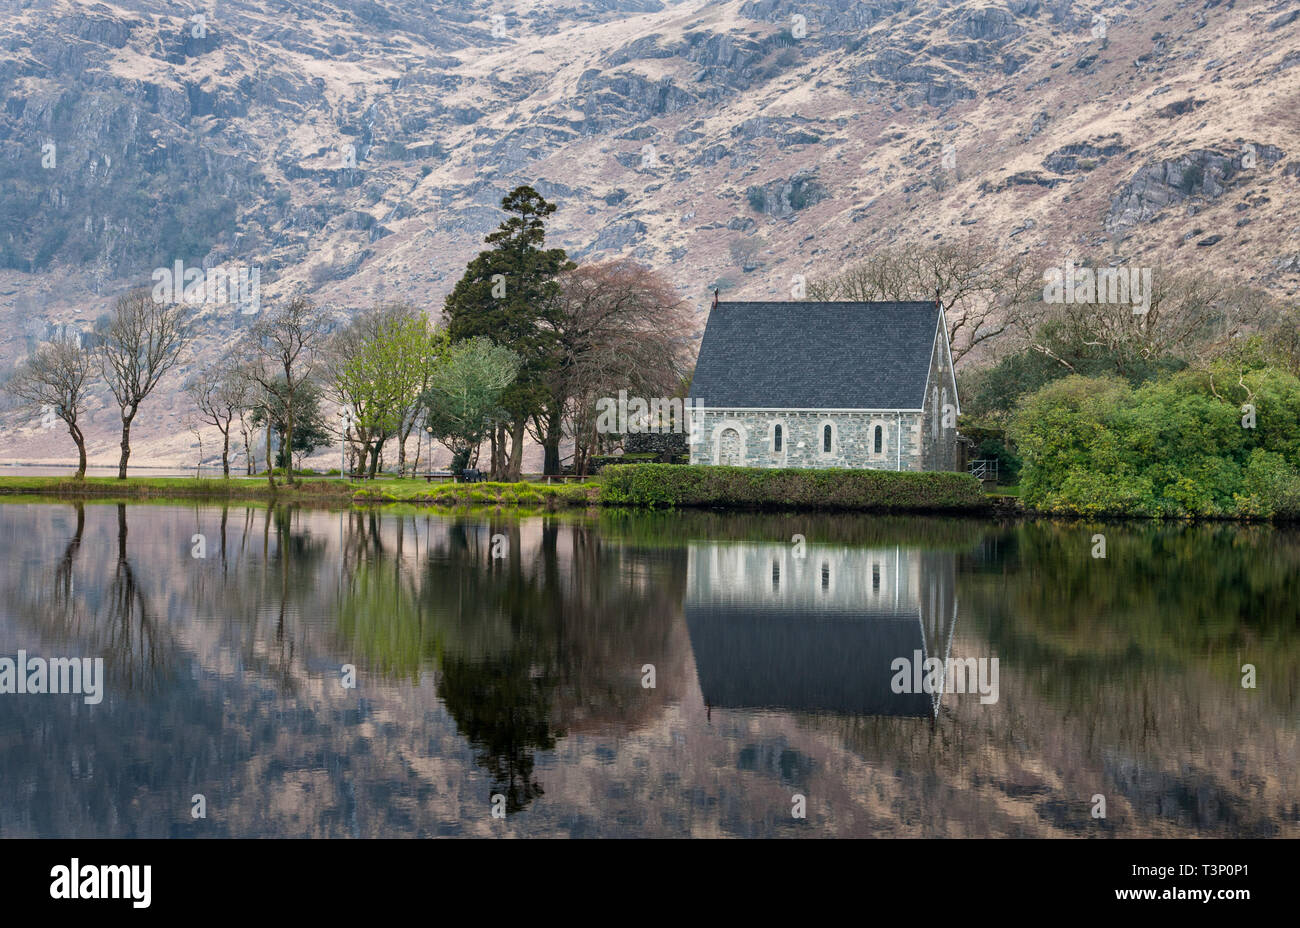 Gougane Barra, Cork, Ireland. 11th April, 2019. A peaceful calm morning at the unspoilt St. Finbarr's Oratory, which is located in the 350 acre national forest in Gougane Barra in Co. Cork, Ireland. Credit: David Creedon/Alamy Live News Stock Photo